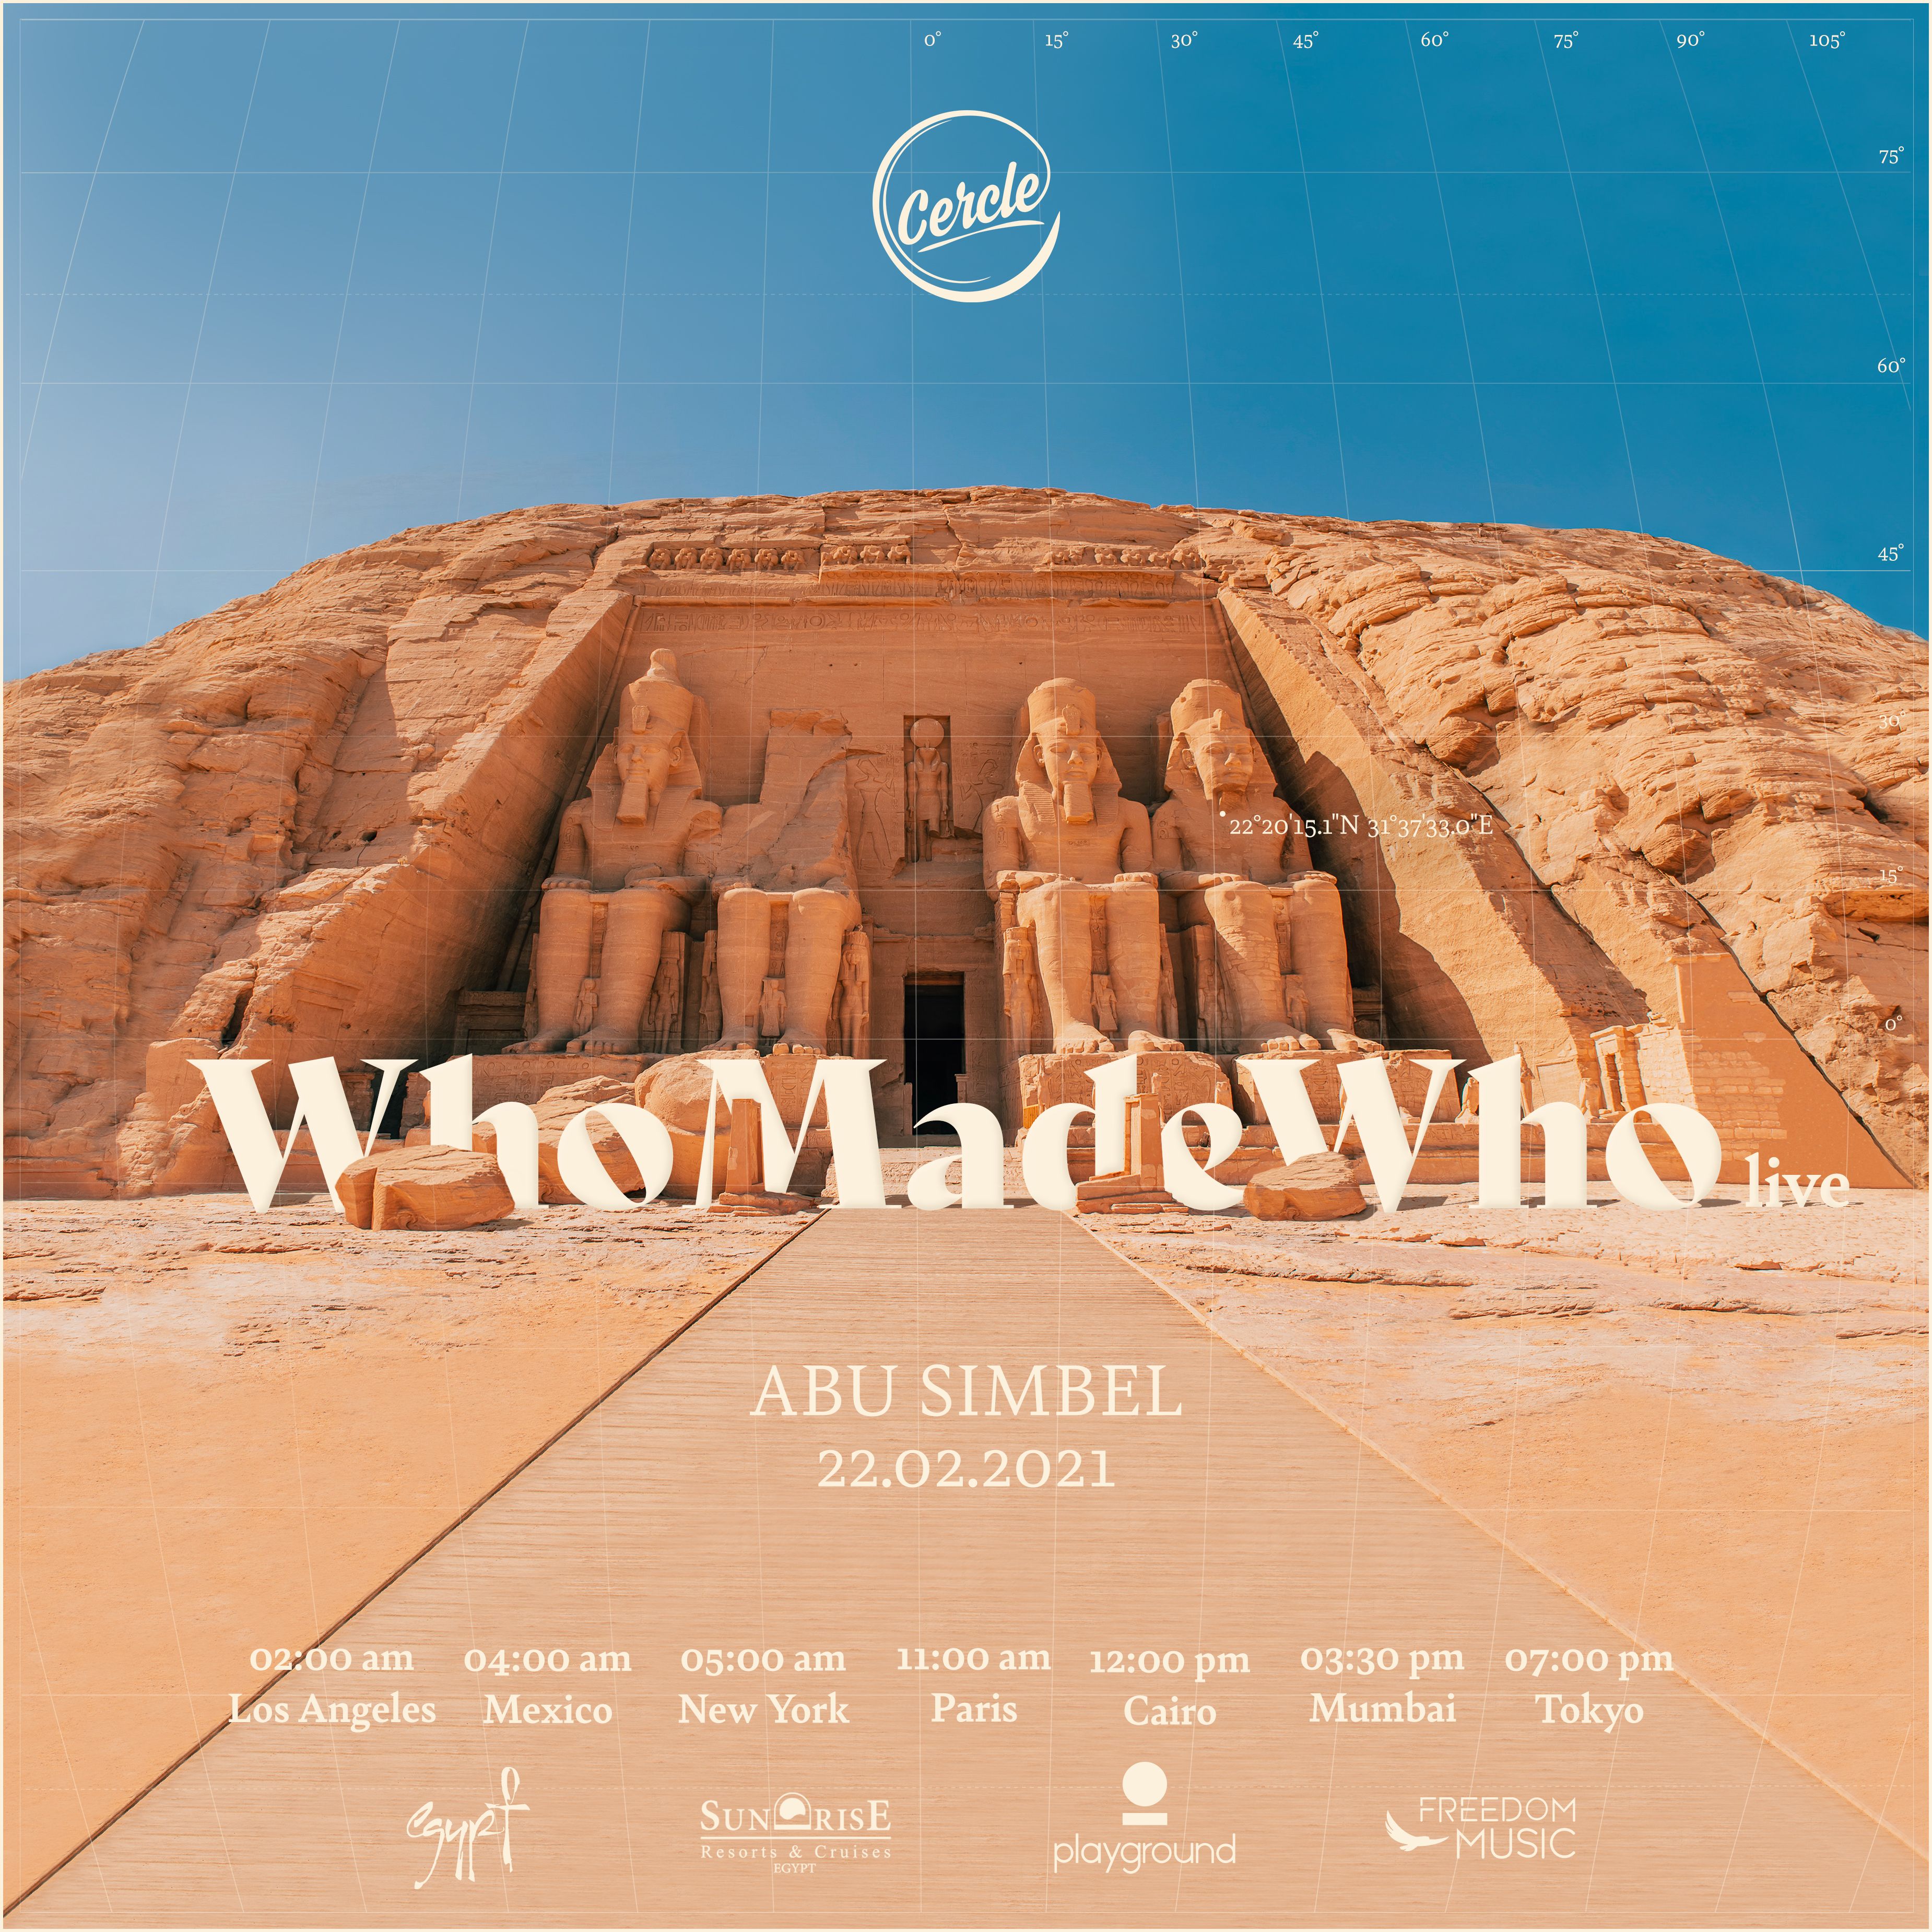 Luchdaich sìos WhoMadeWho live at Abu Simbel, Egypt for Cercle